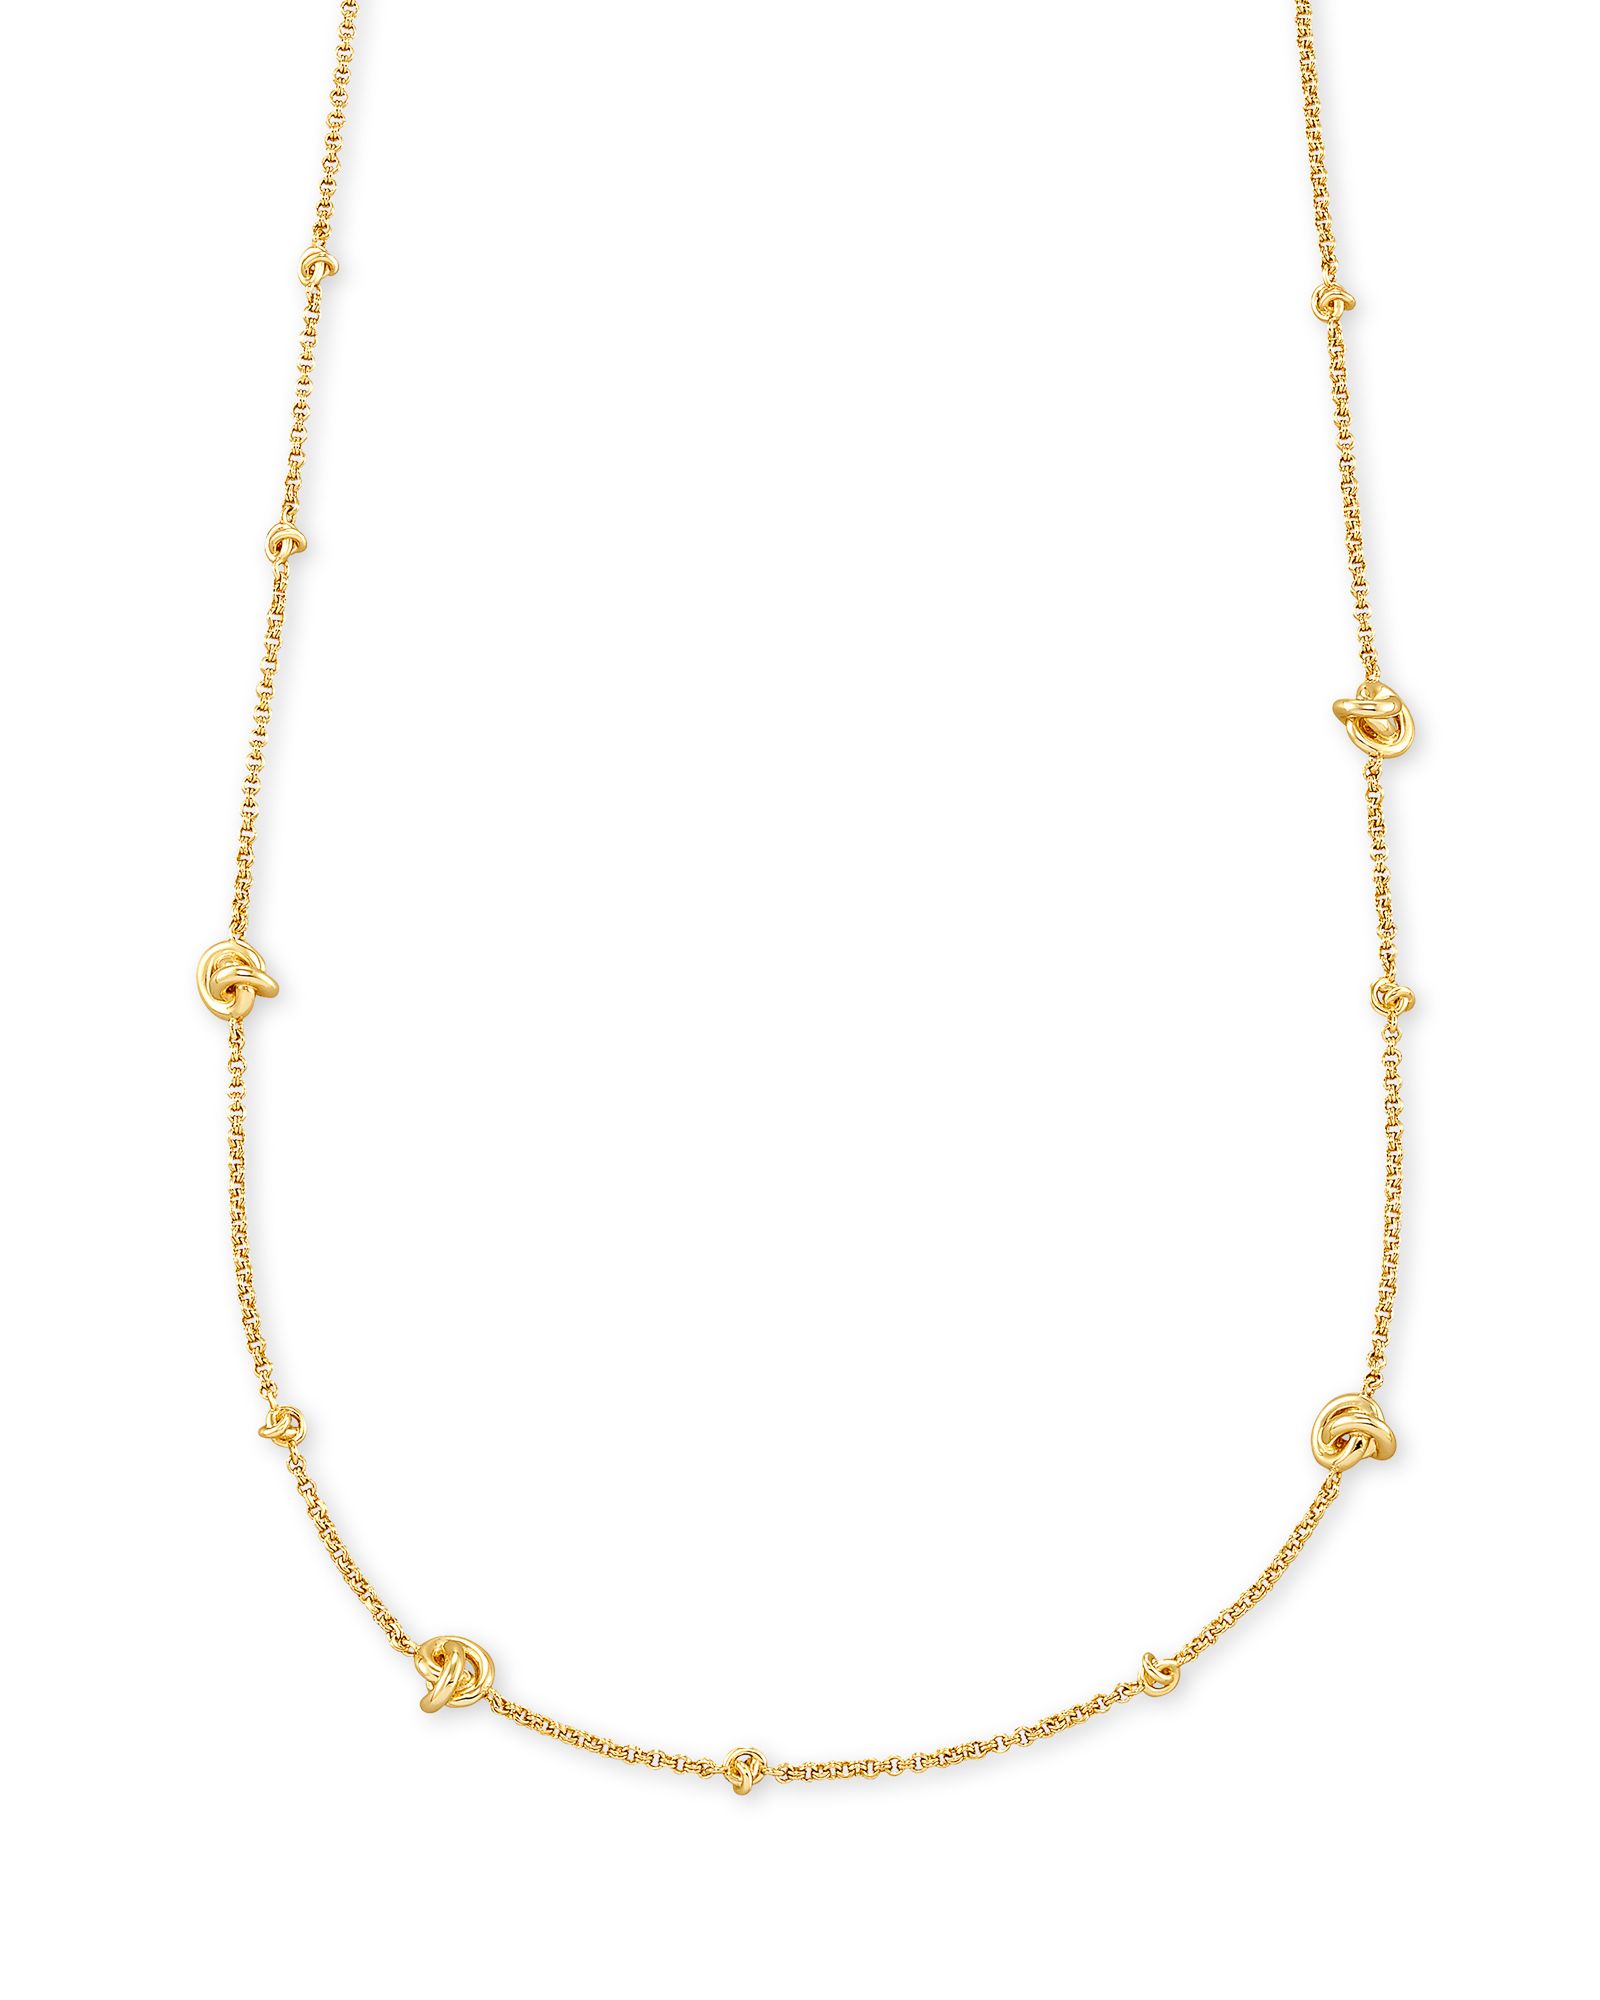 Presleigh Love Knot Adjustable Necklace in Gold | Kendra Scott